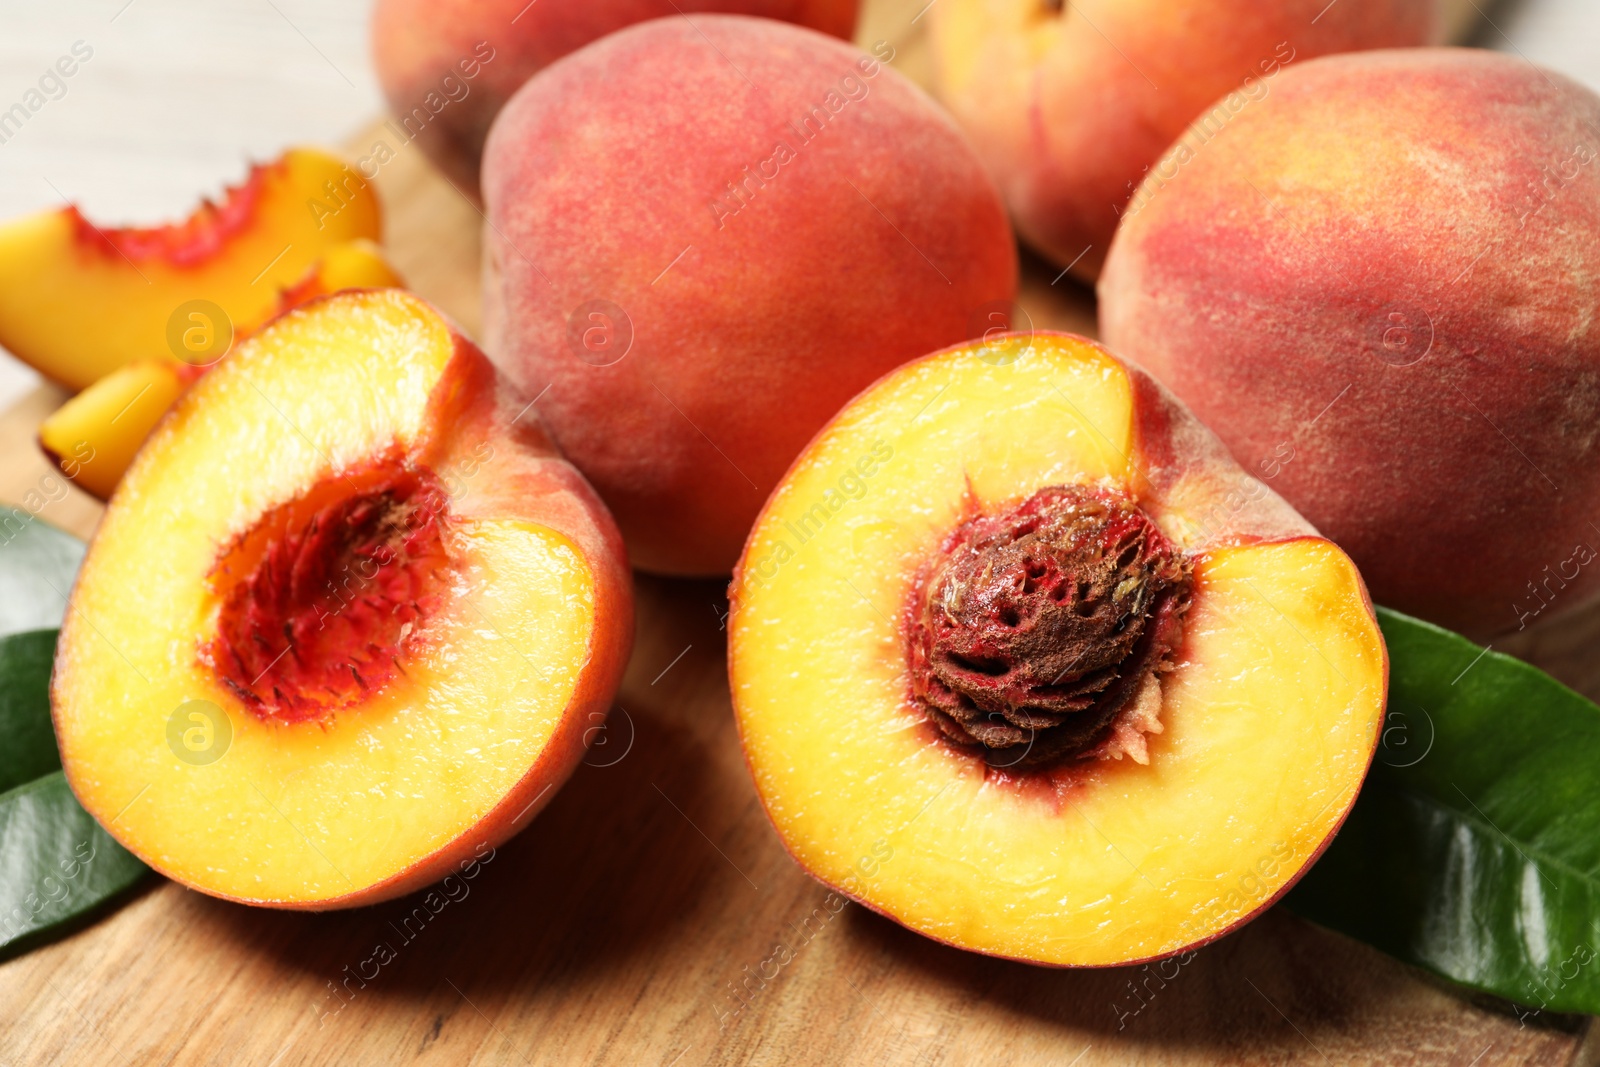 Photo of Cut and whole fresh ripe peaches on wooden board, closeup